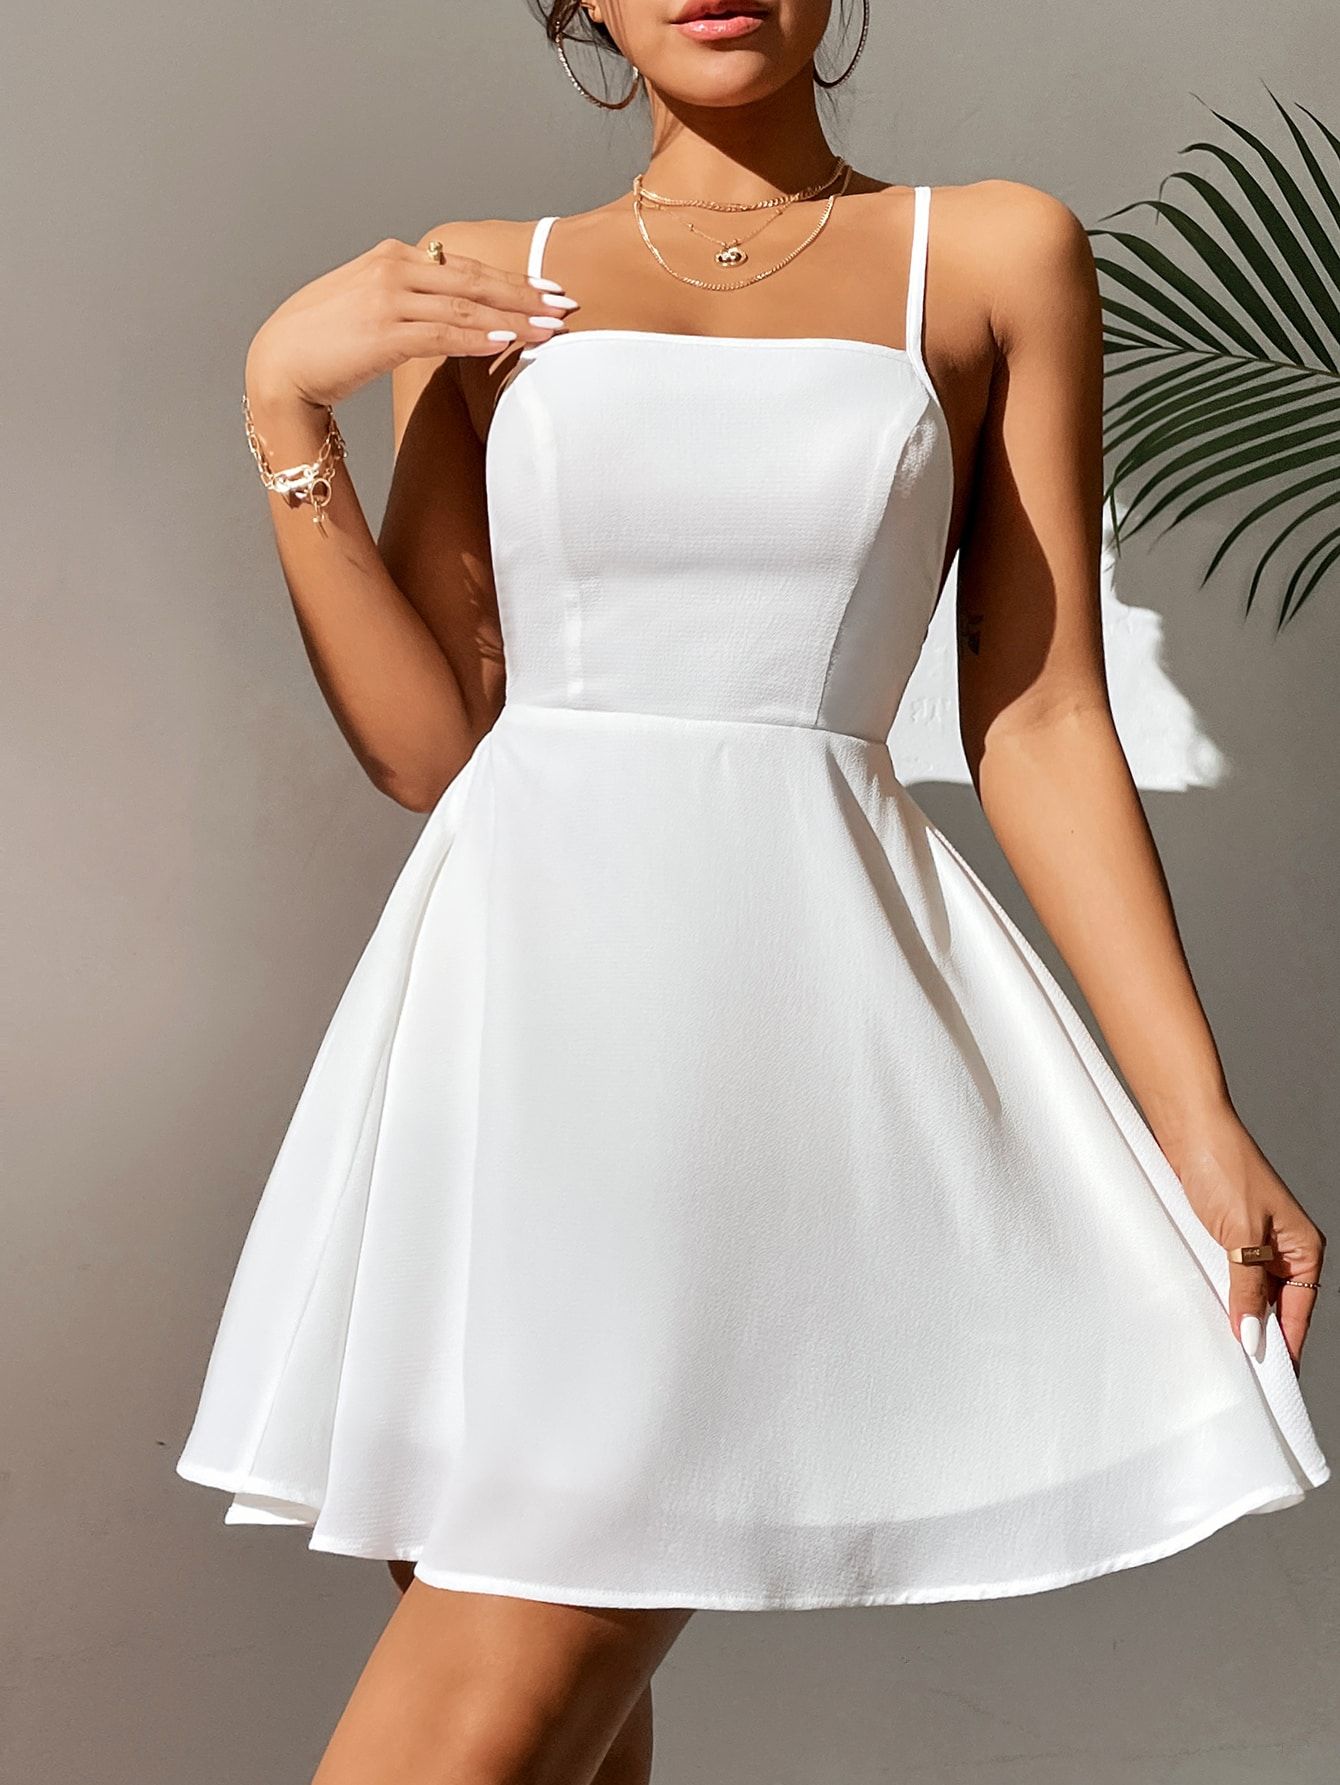 Stay Chic and Comfortable in White Camisoles